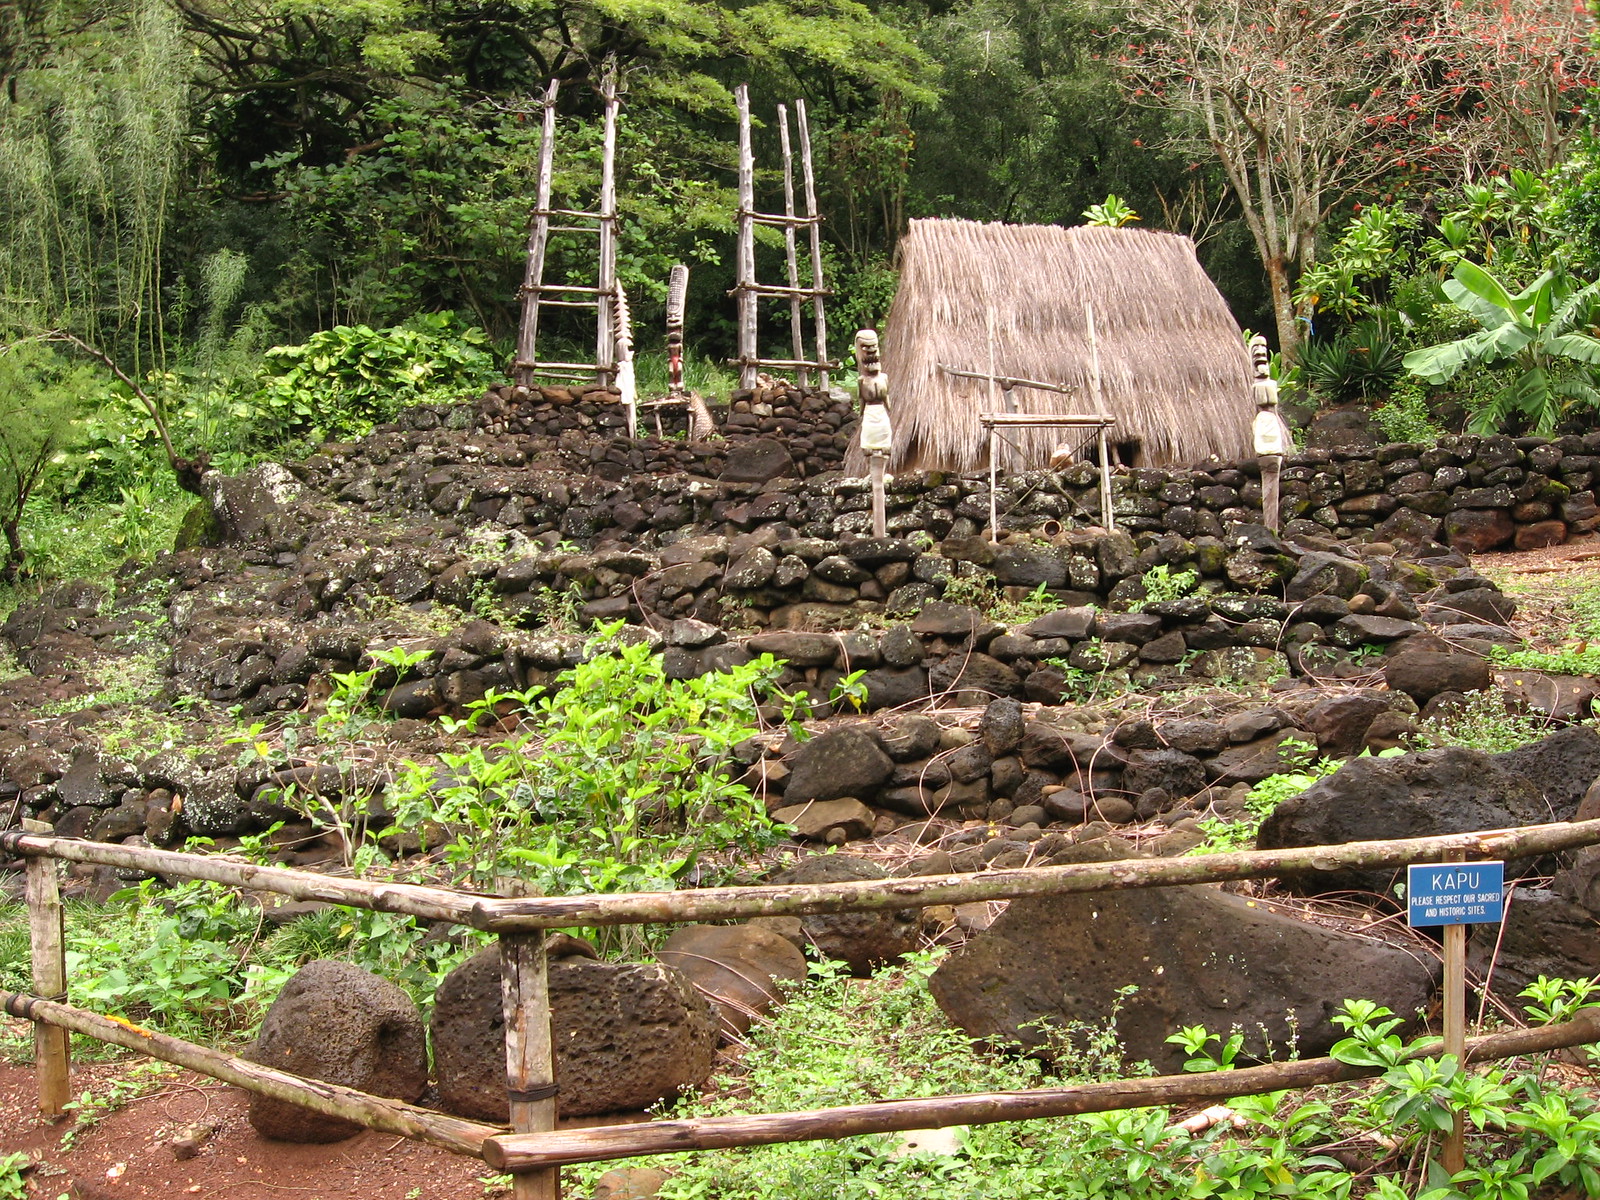 Historic botanical garden including stone terraces and a thatched structure.